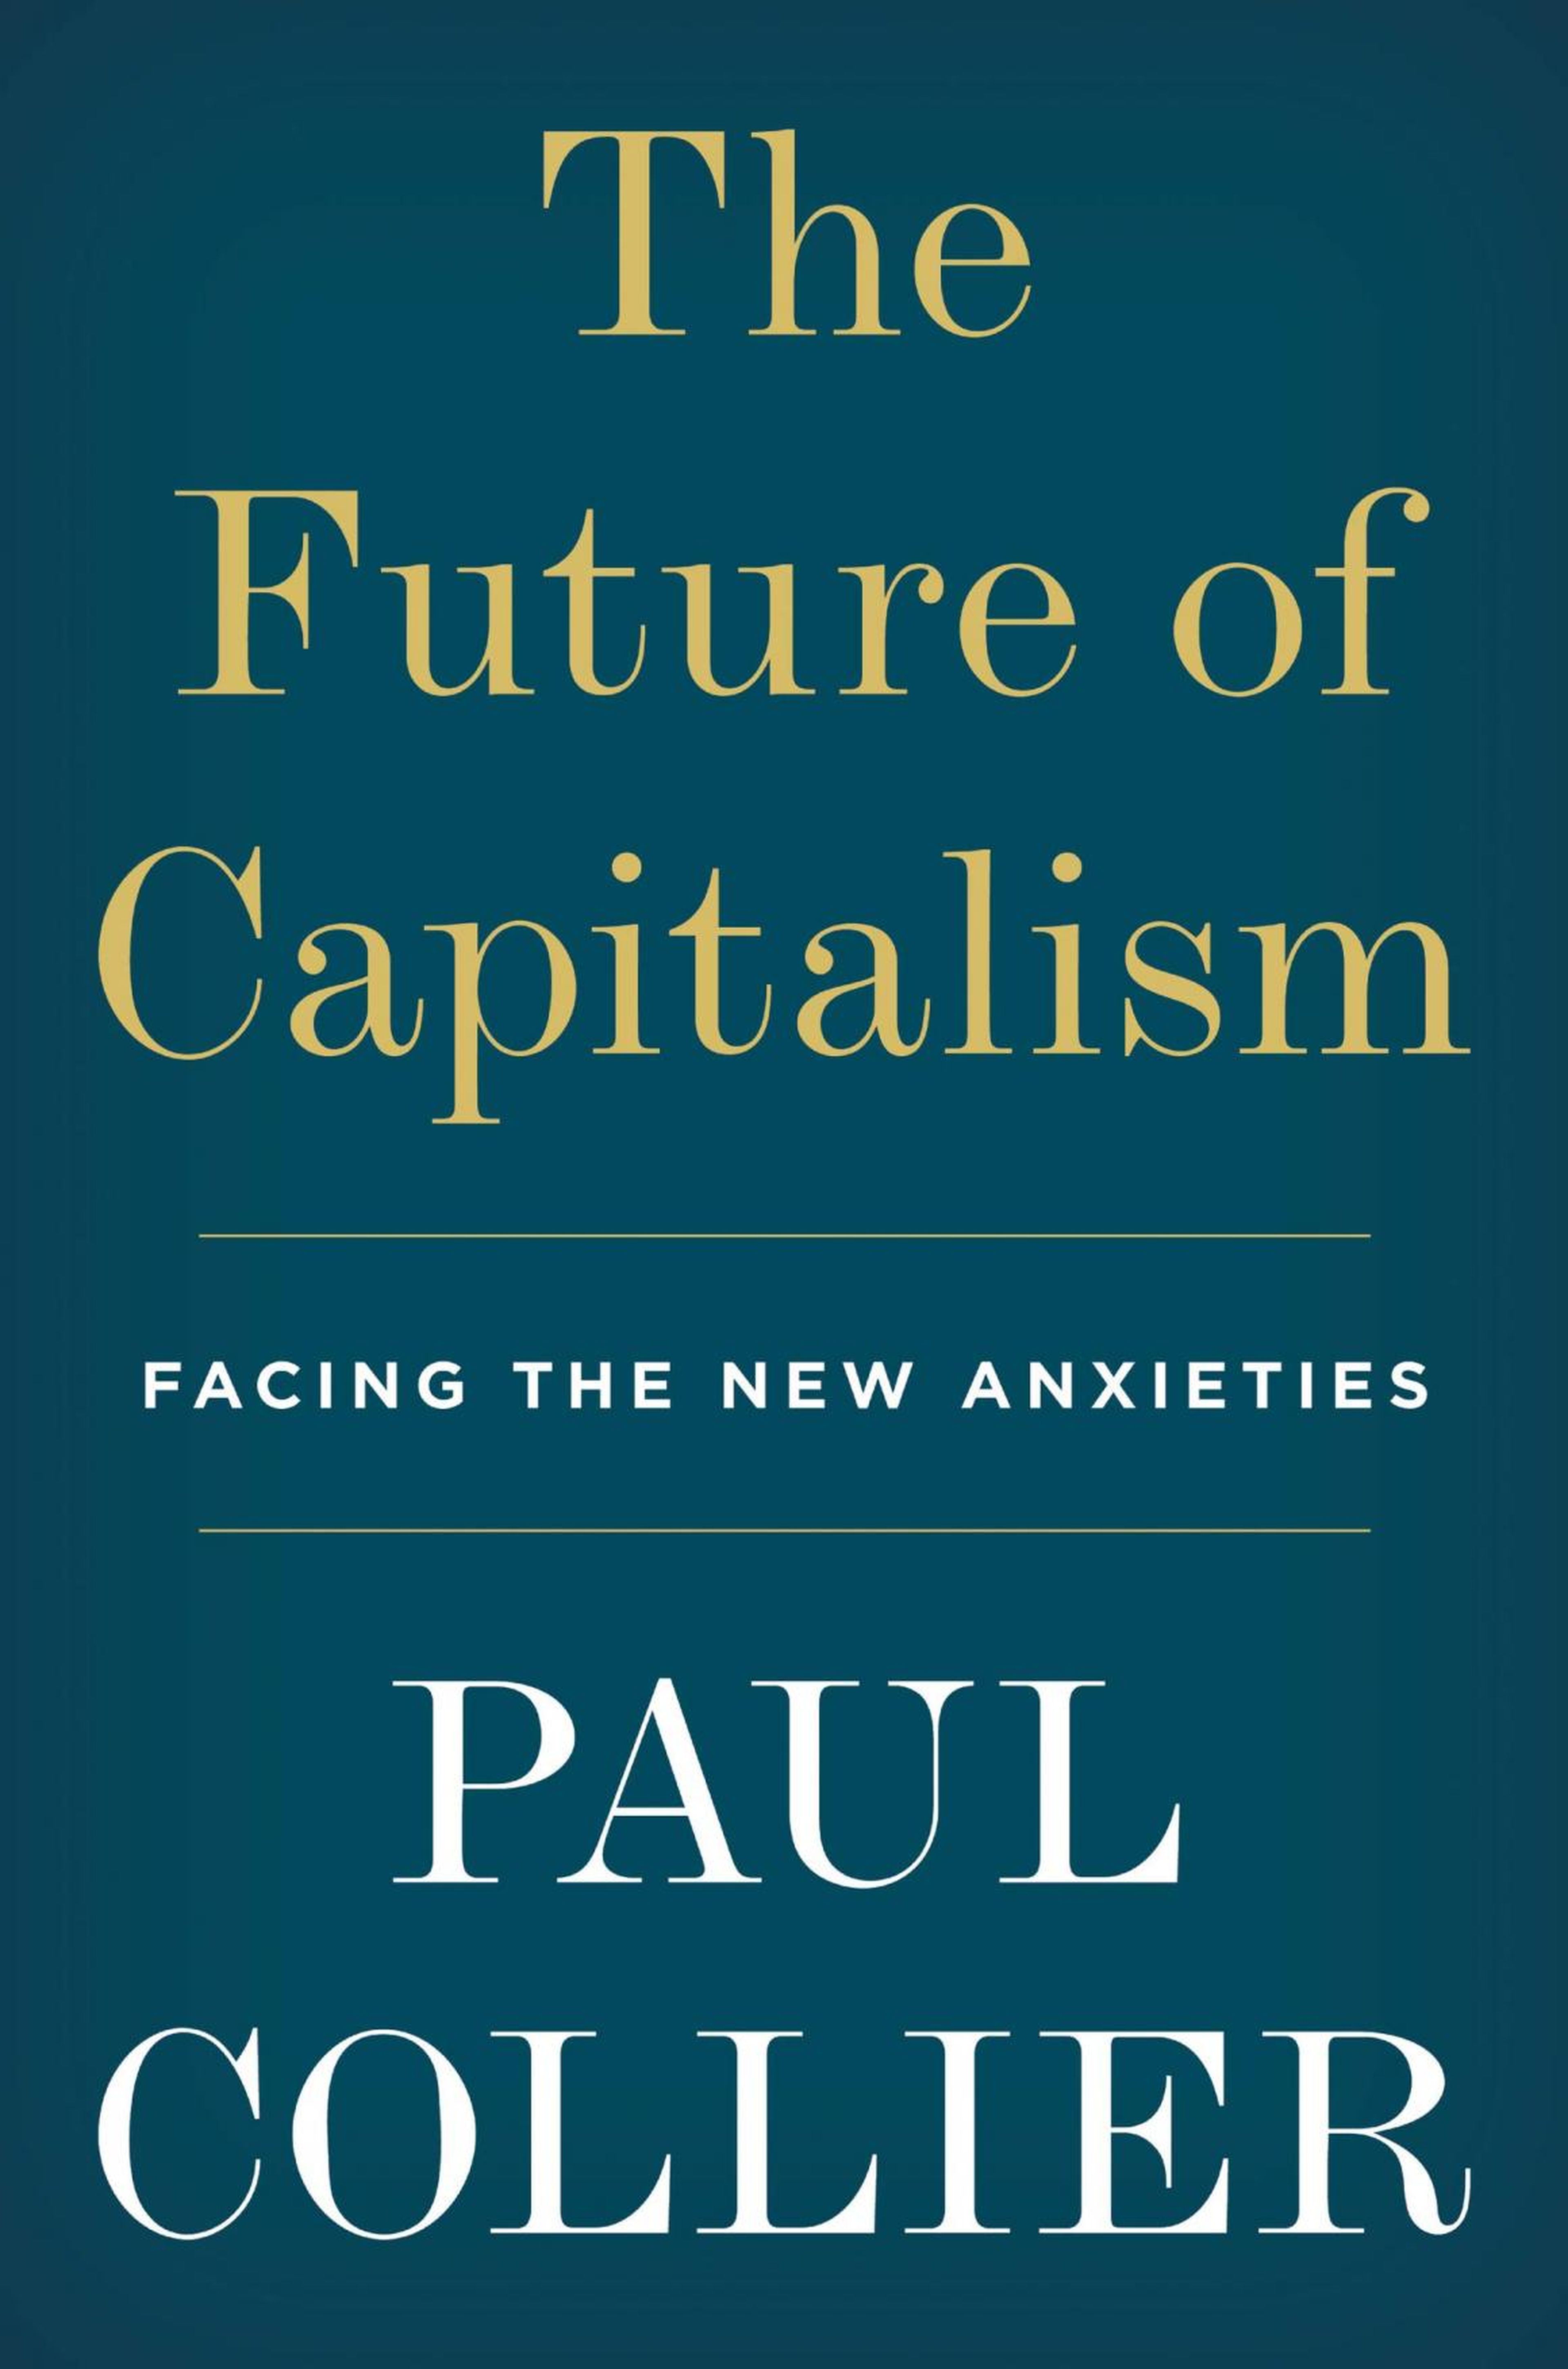 "The Future of Capitalism" by Paul Collier